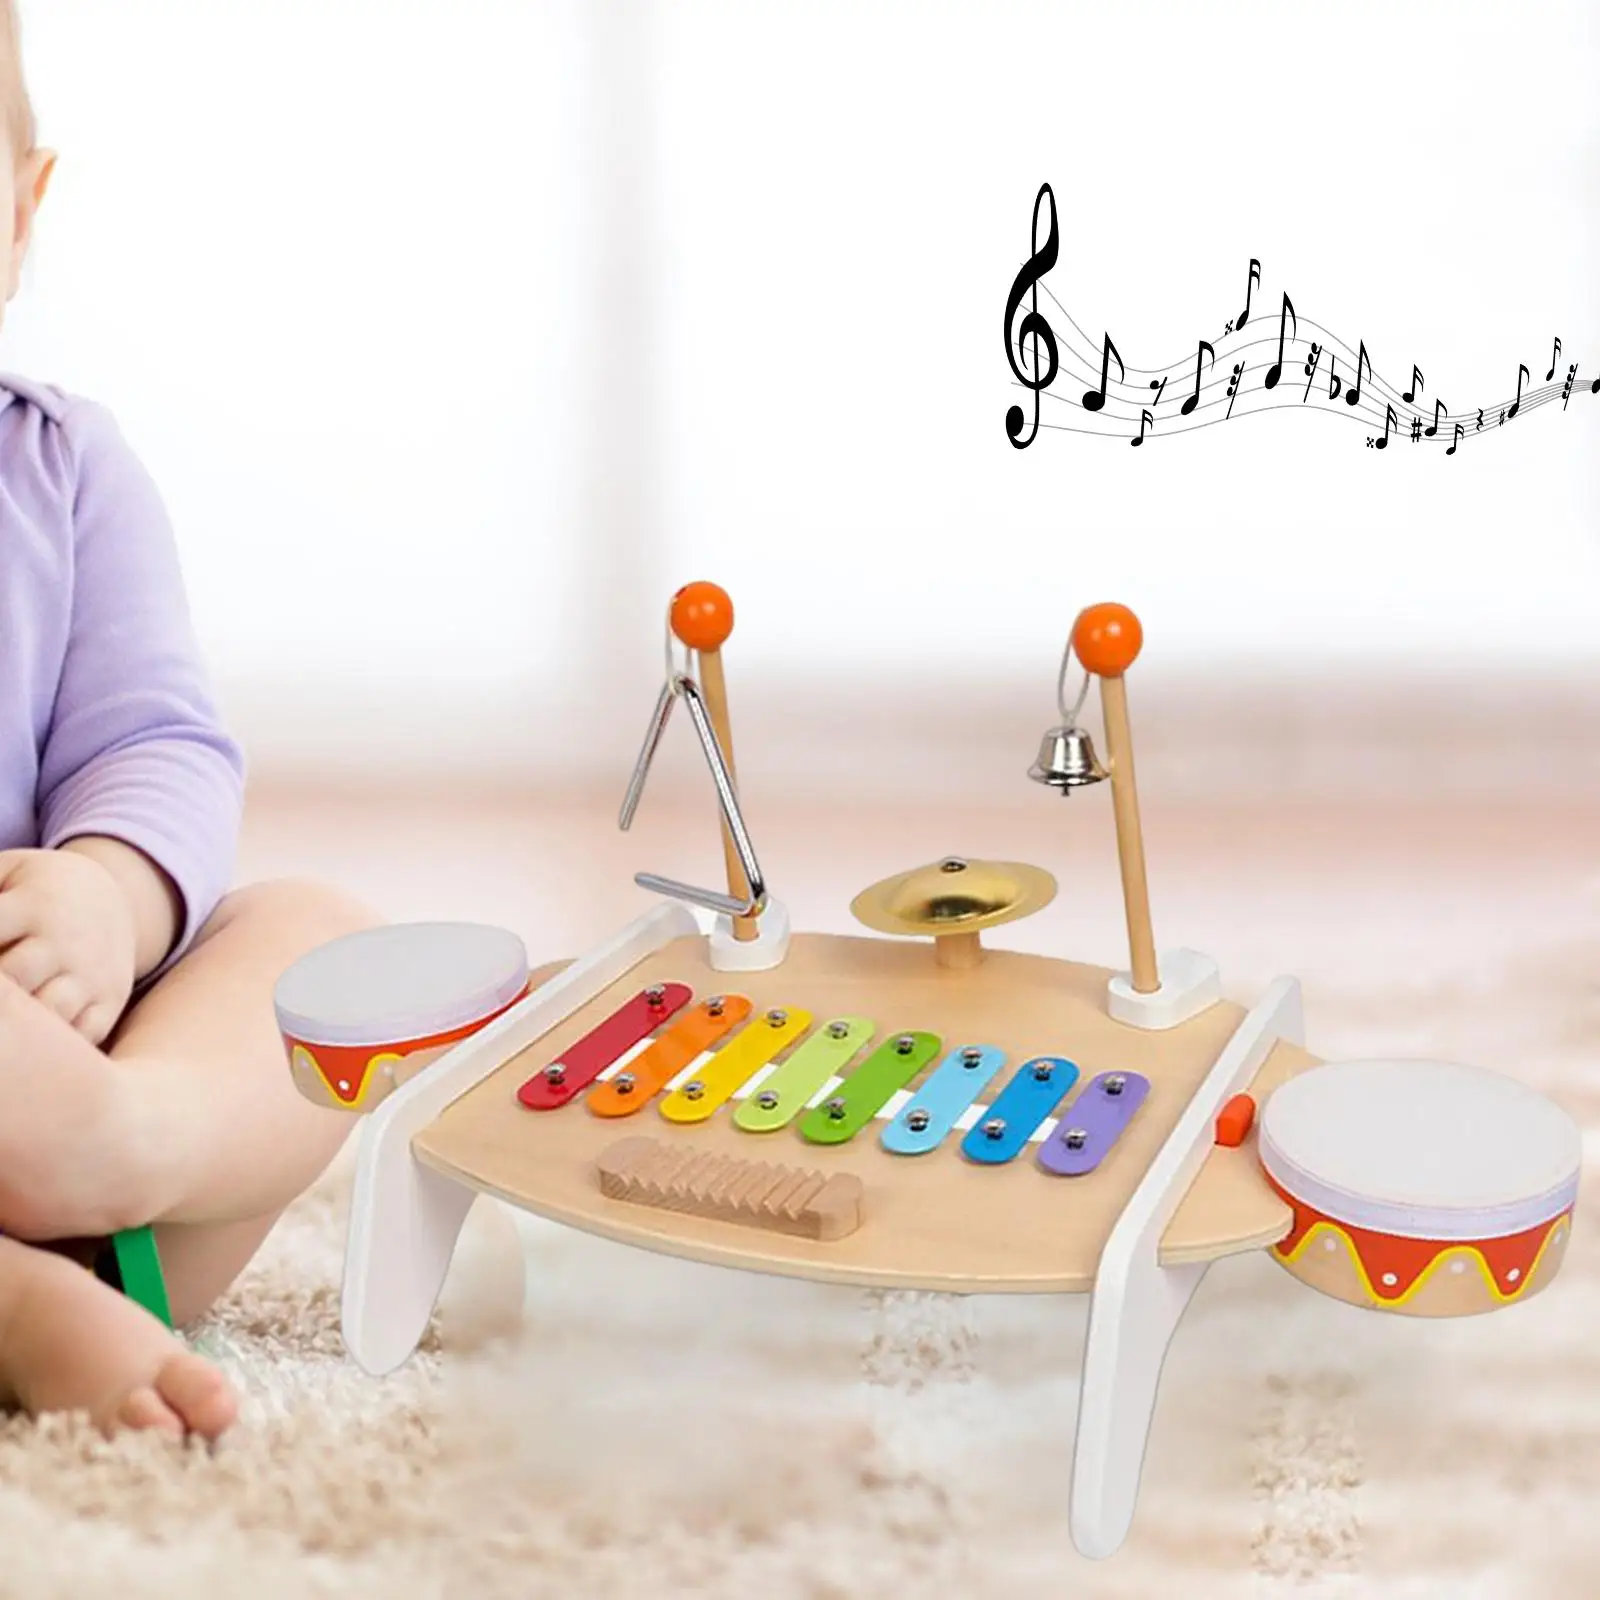 Multifunction Xylophone Musical Toy Musical Instruments Wooden Percussion Toy for Boys